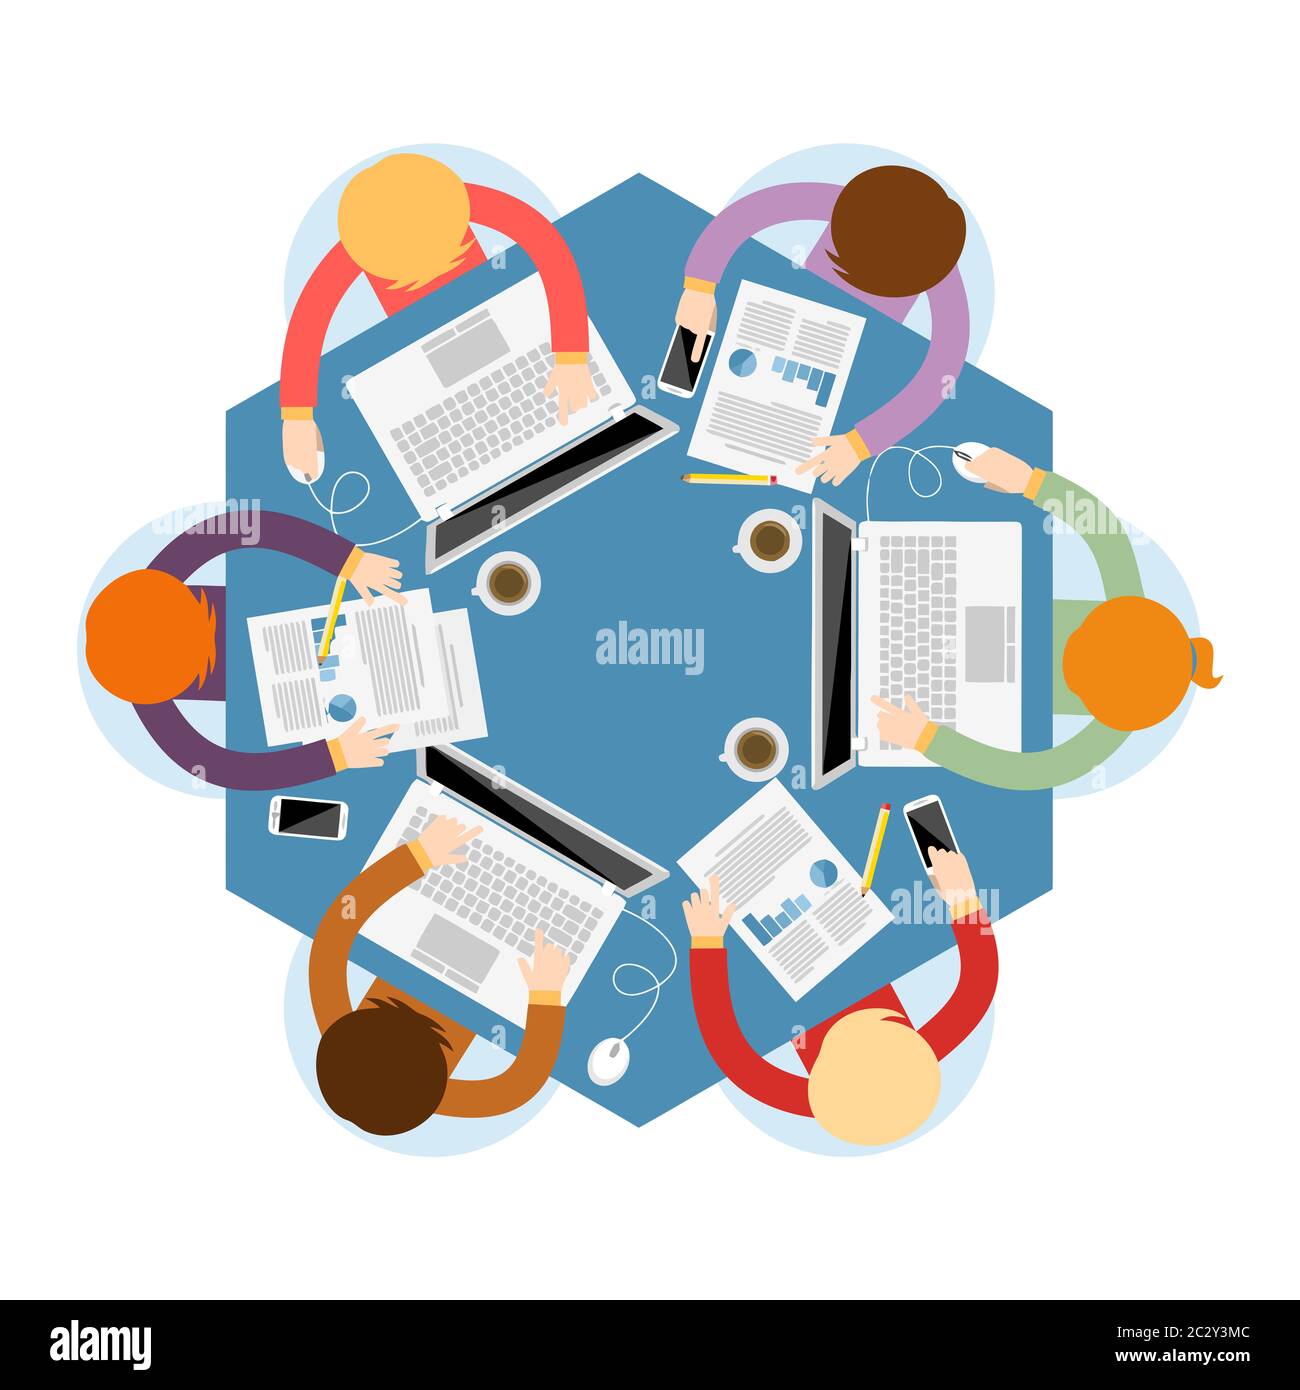 Strategy Round Table Discussing Office Computer Group Meeting Illustration Teamwork Stock Photo Alamy